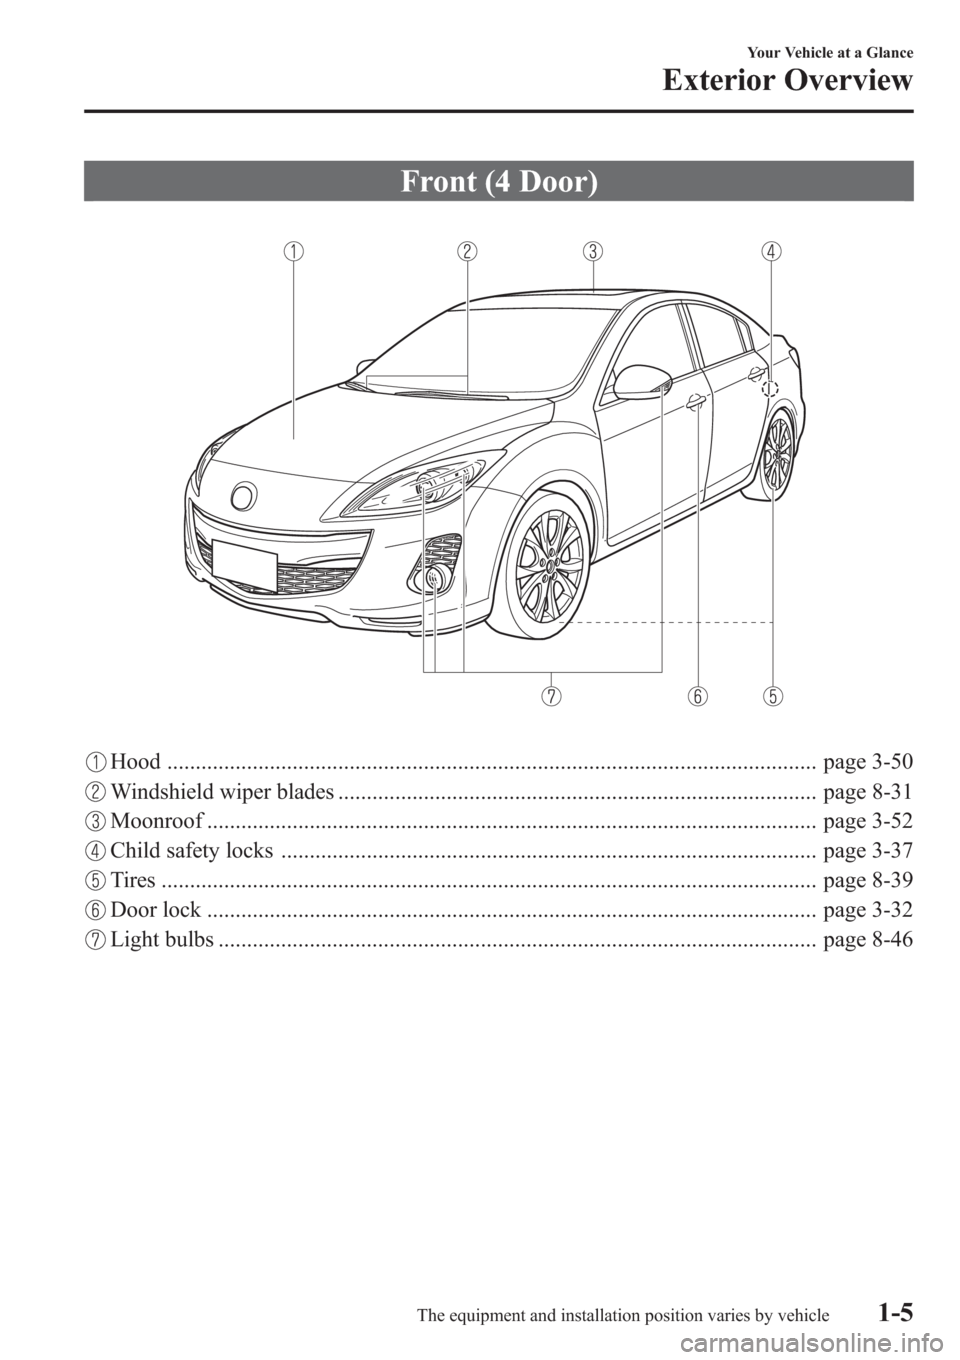 MAZDA MODEL 3 HATCHBACK 2013  Owners Manual (in English) Front (4 Door)
Hood .................................................................................................................. page 3-50
Windshield wiper blades ...............................